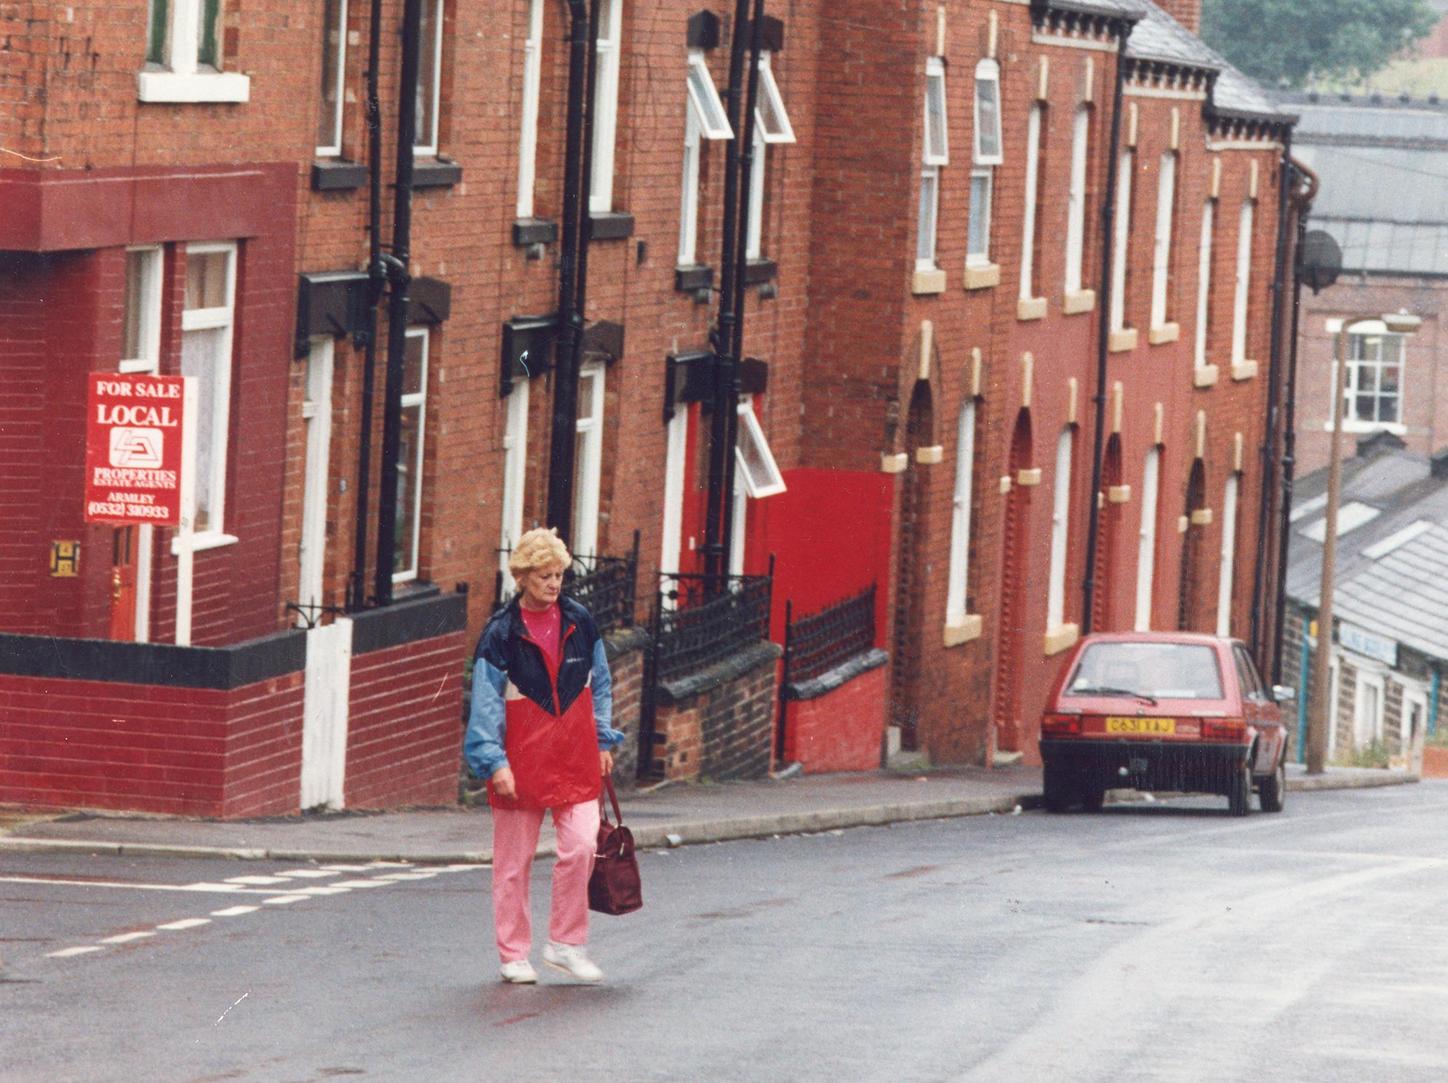 A street in Armley. Note the old Leeds dialling code on the for sale sign.